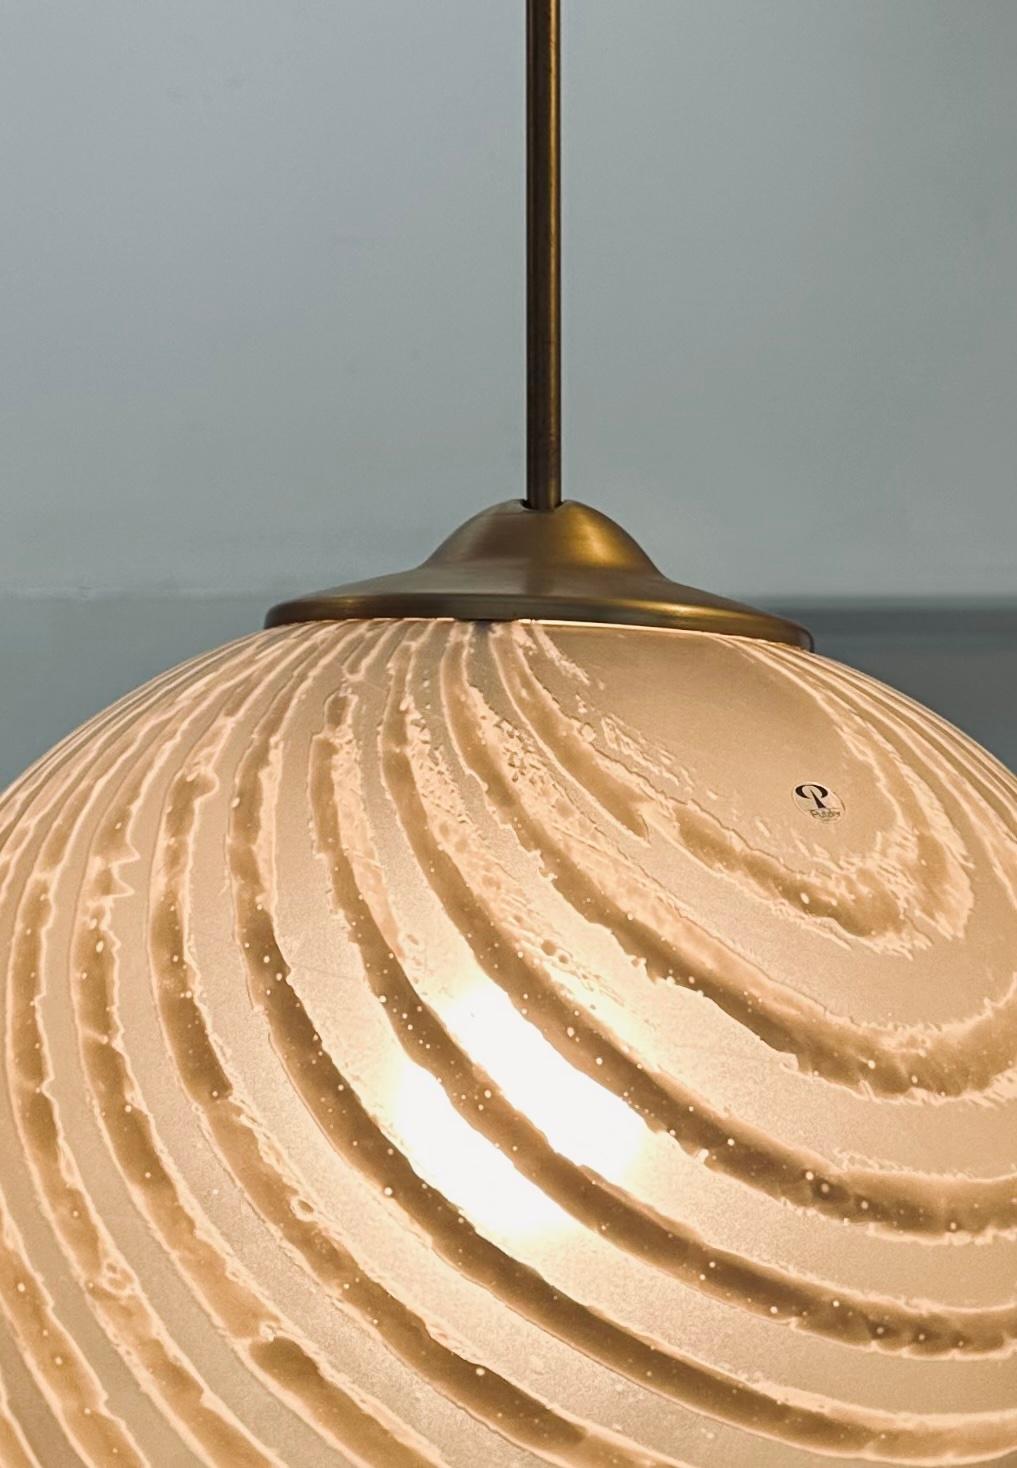 1970s German Peill & Putzler gold tinted striped satin glass hanging ceiling pendant light.  The globe appears quite different when lit with its vibrant lines of a darker shade of white running around its surface inside the globe.  The globe is